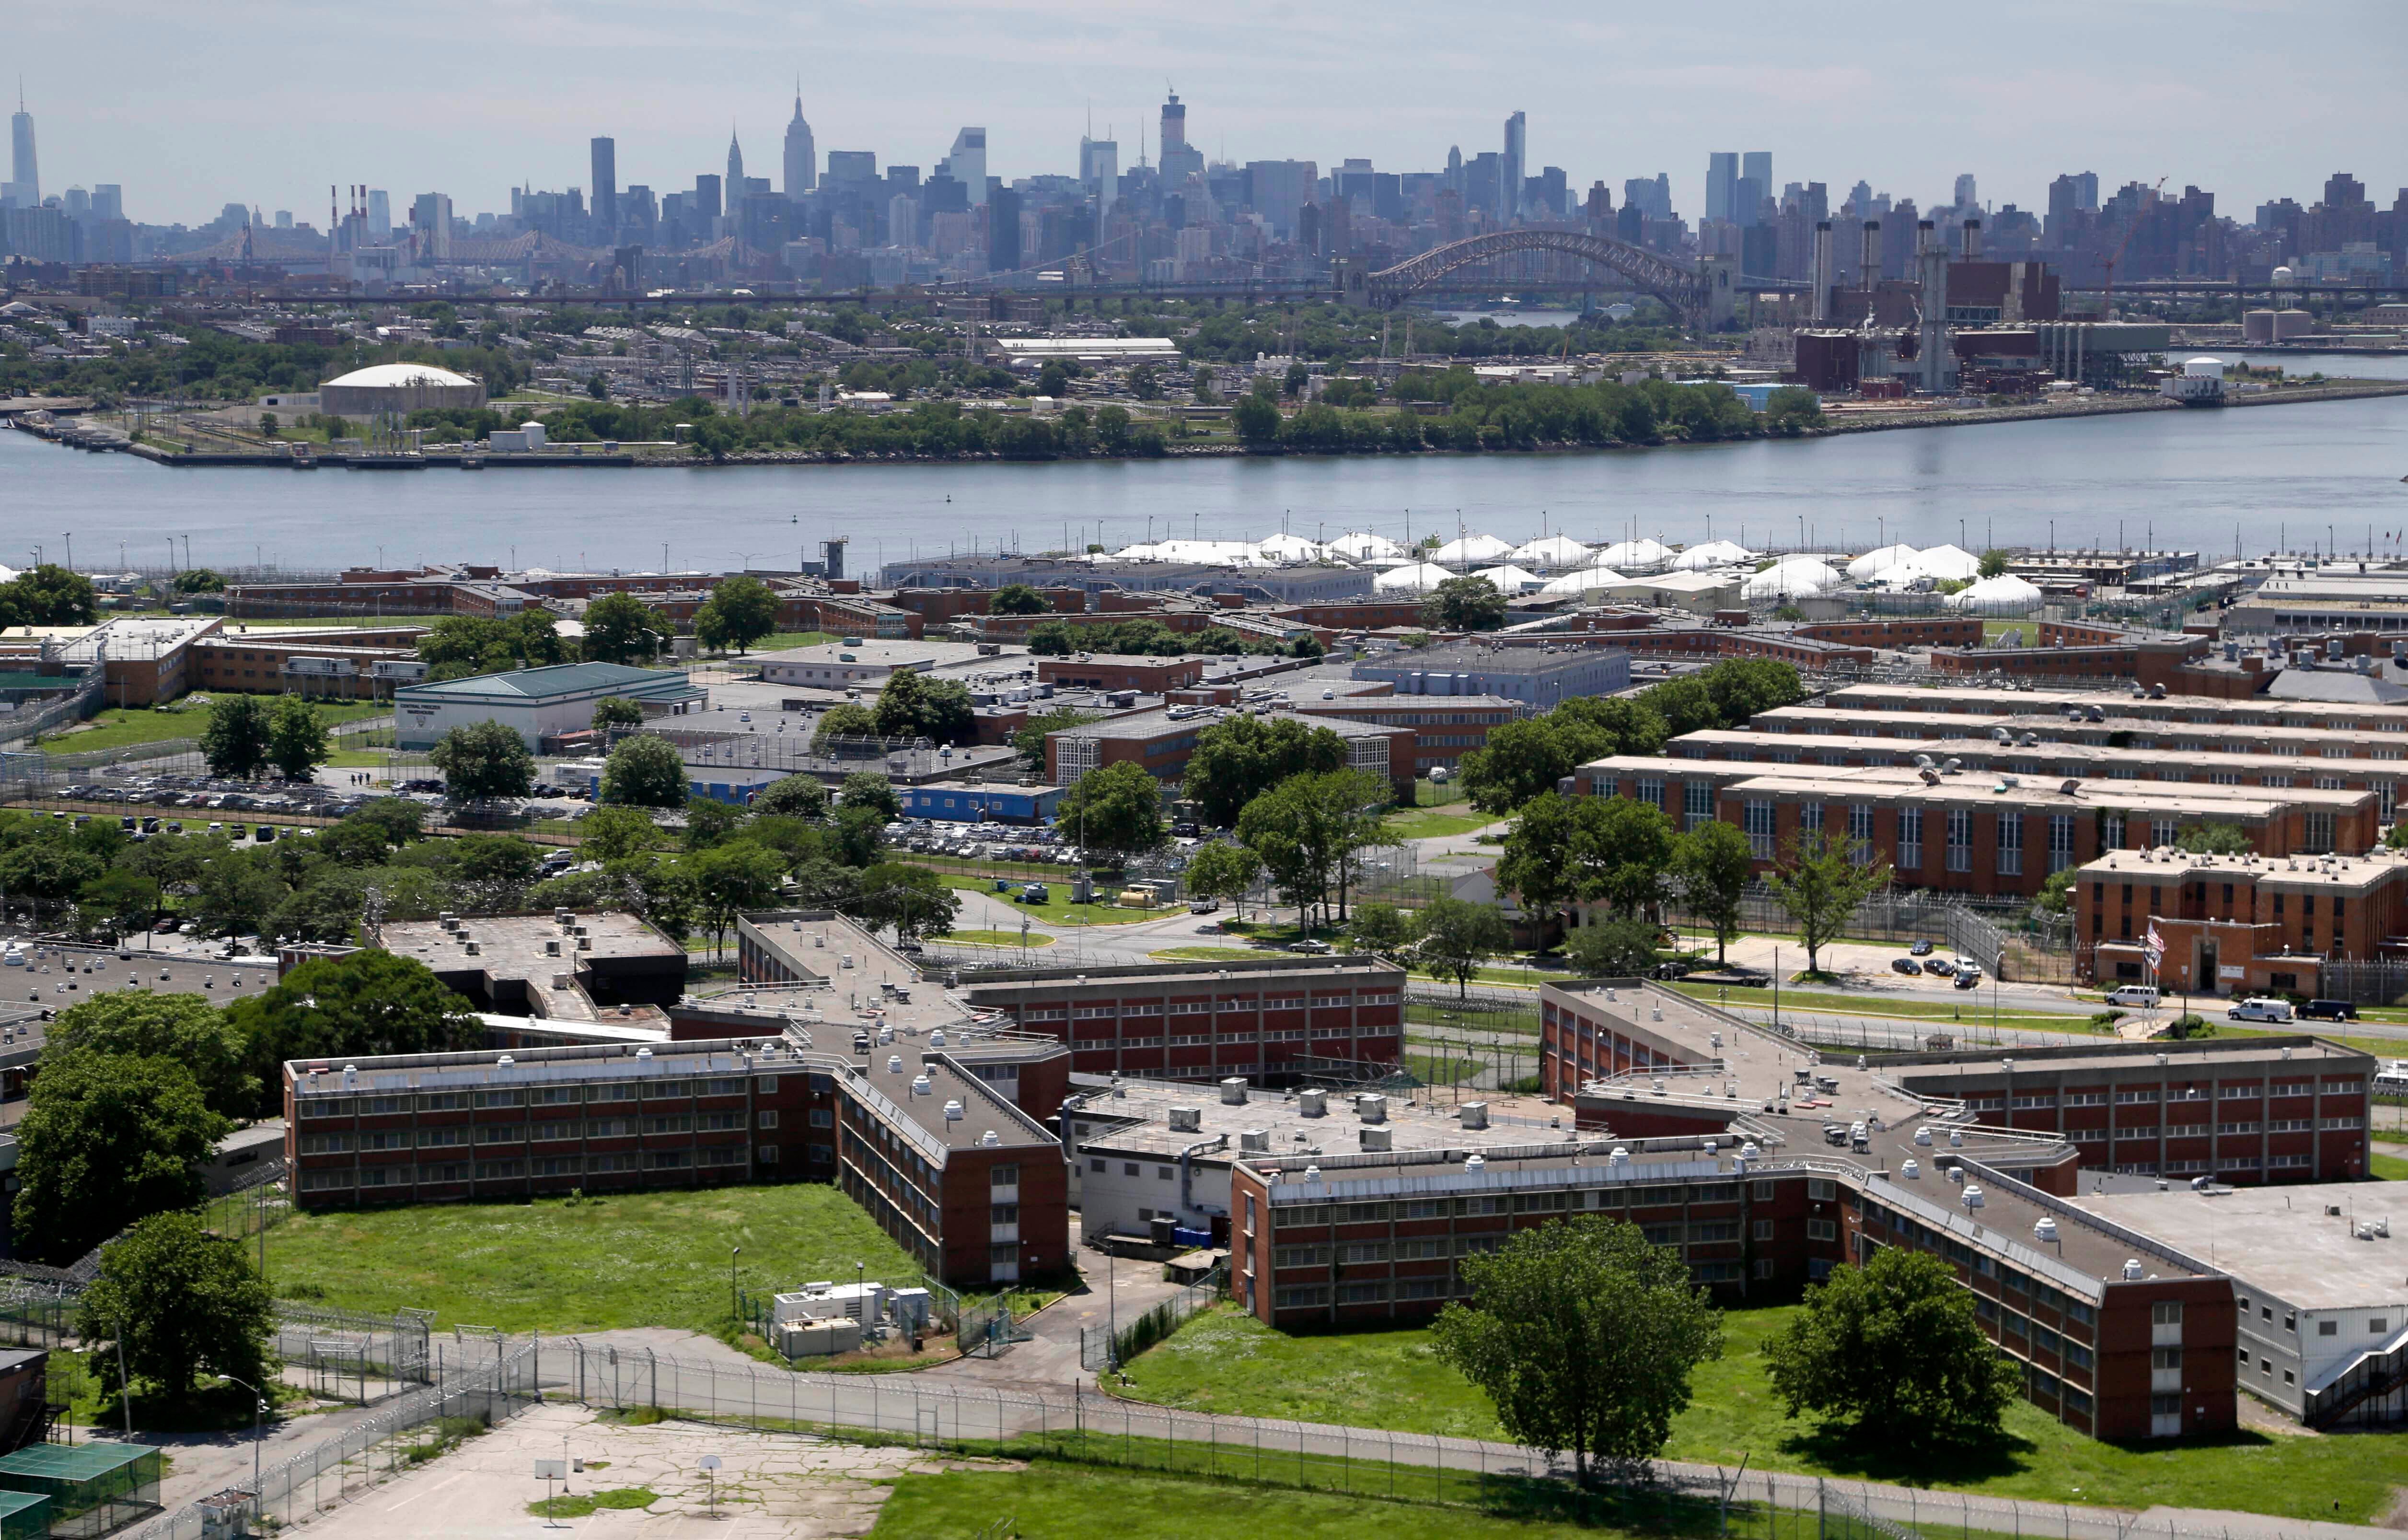 Rikers Island jail in New York would be ‘prepared’ to house former president Donald Trump, the NYC mayor has said